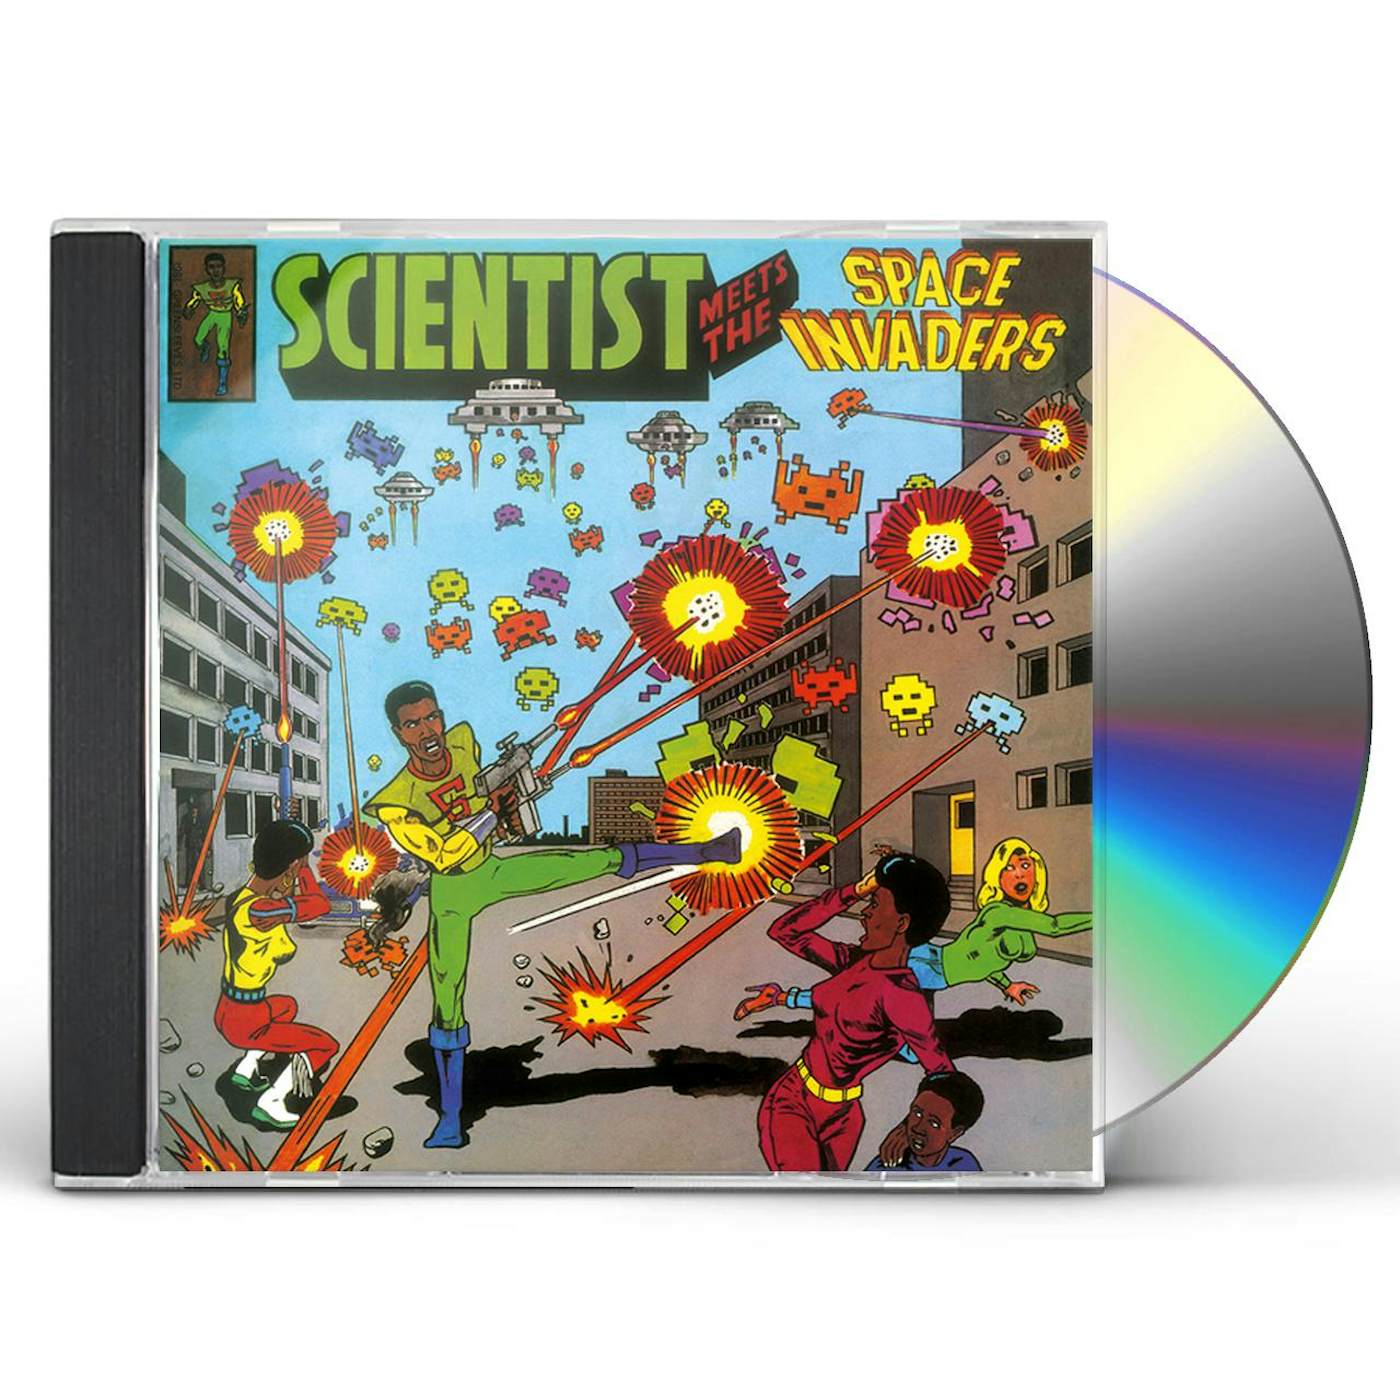 Scientist MEETS THE SPACE INVADERS CD